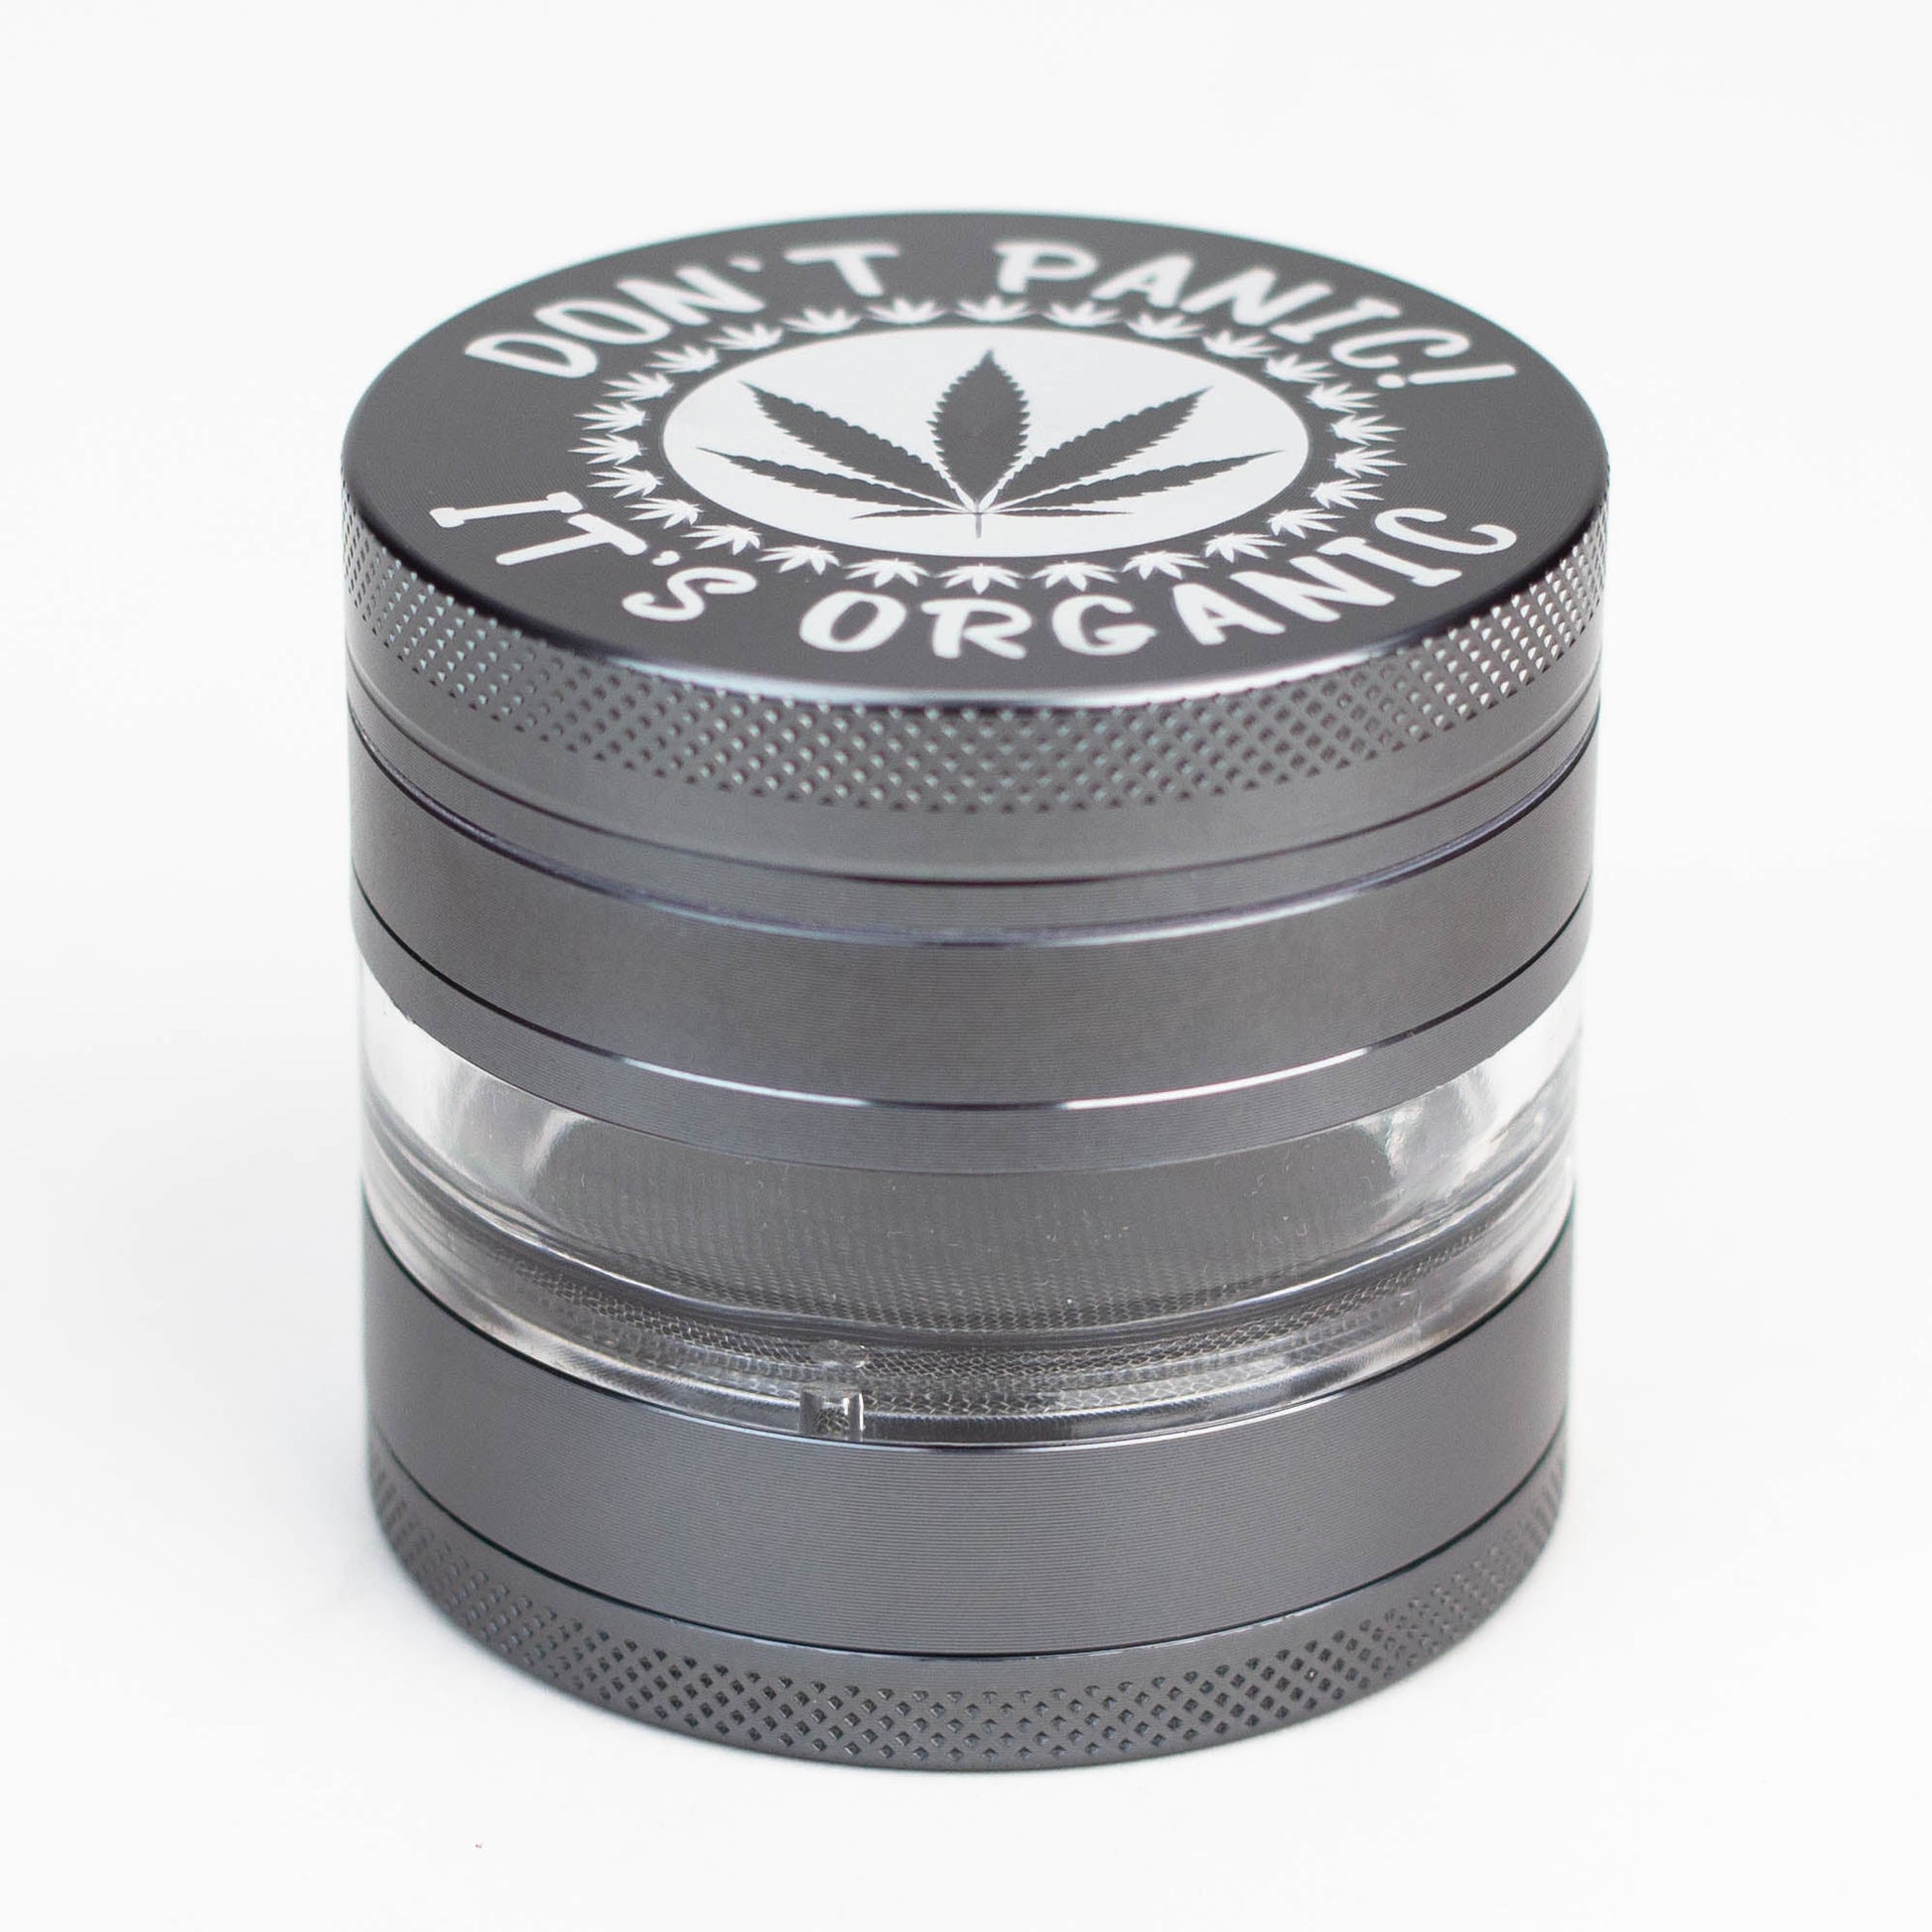 Heavy Duty Large "Don't Panic It's Organic" 4 Parts Weed Grinder Engraved in Canada_11